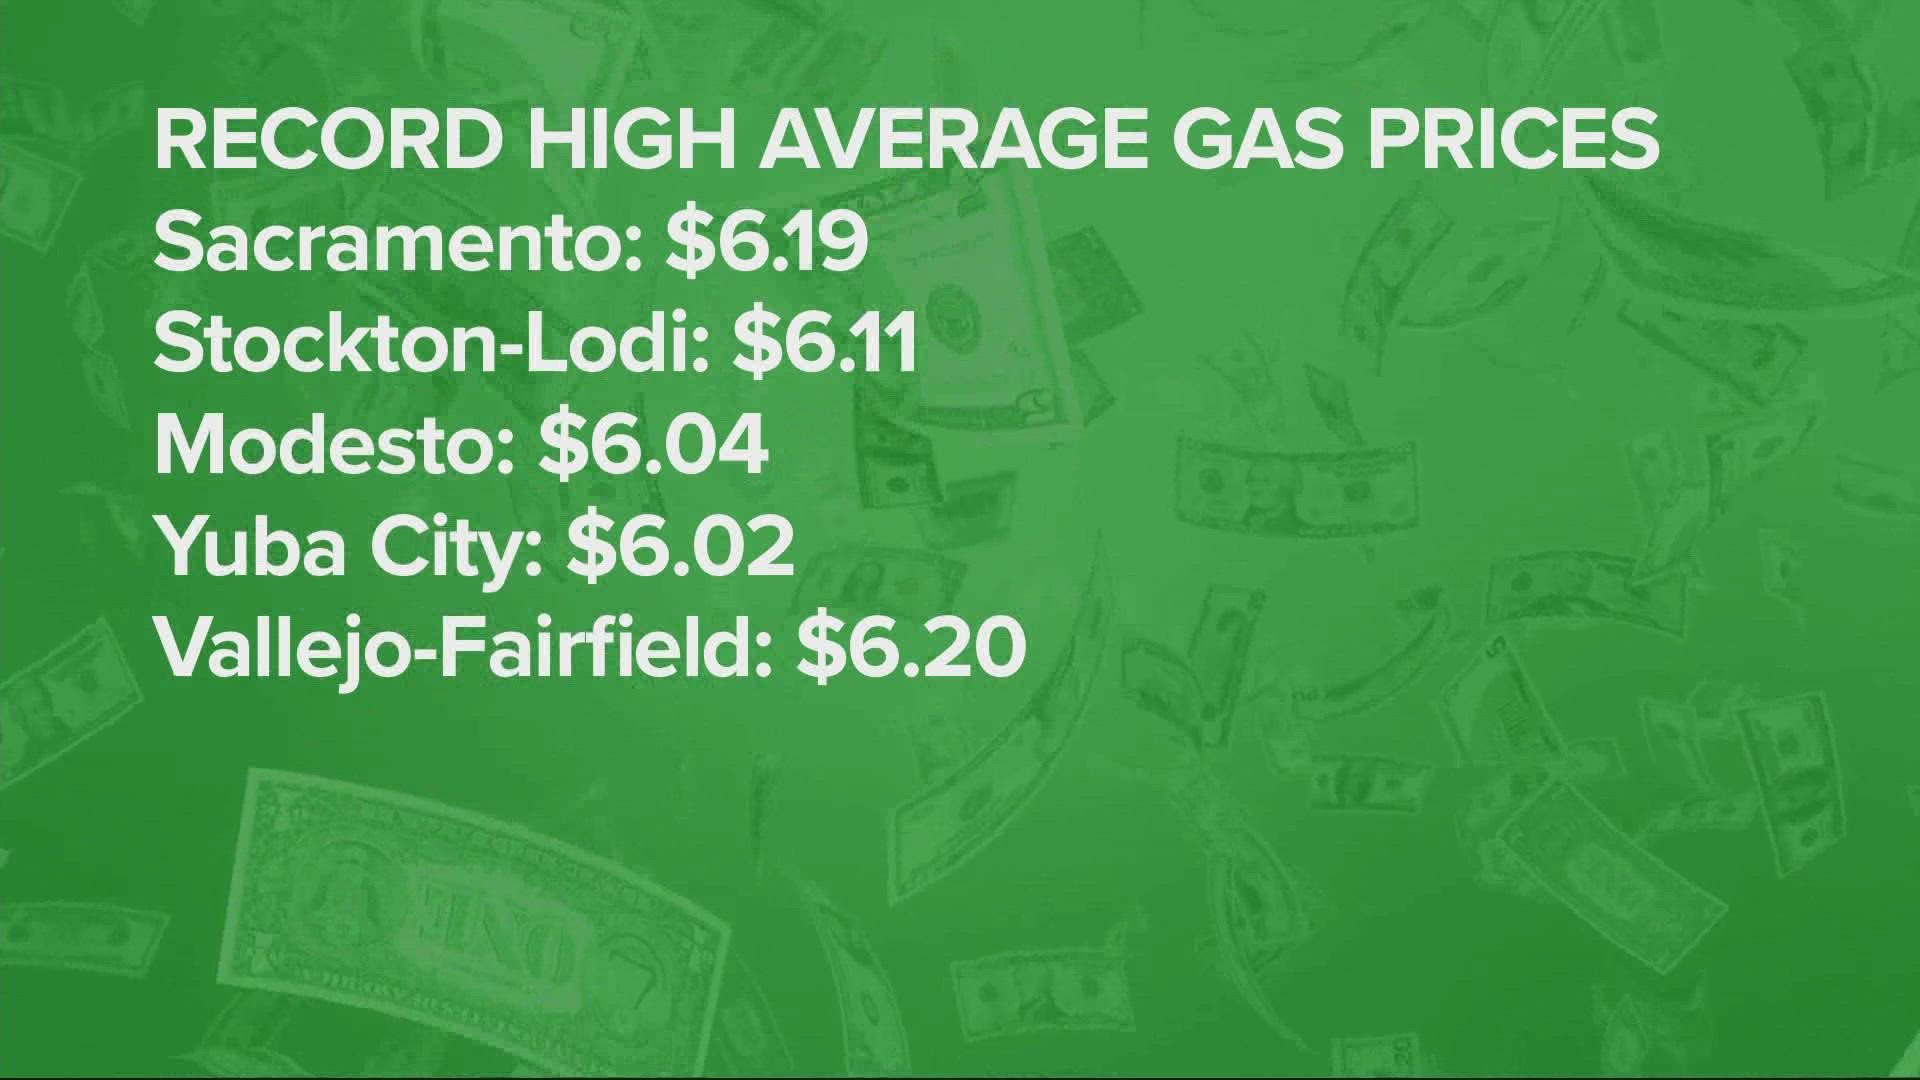 The highest price of gas in the Golden State is in Mono County, sitting at just under $7 for a gallon of gas.